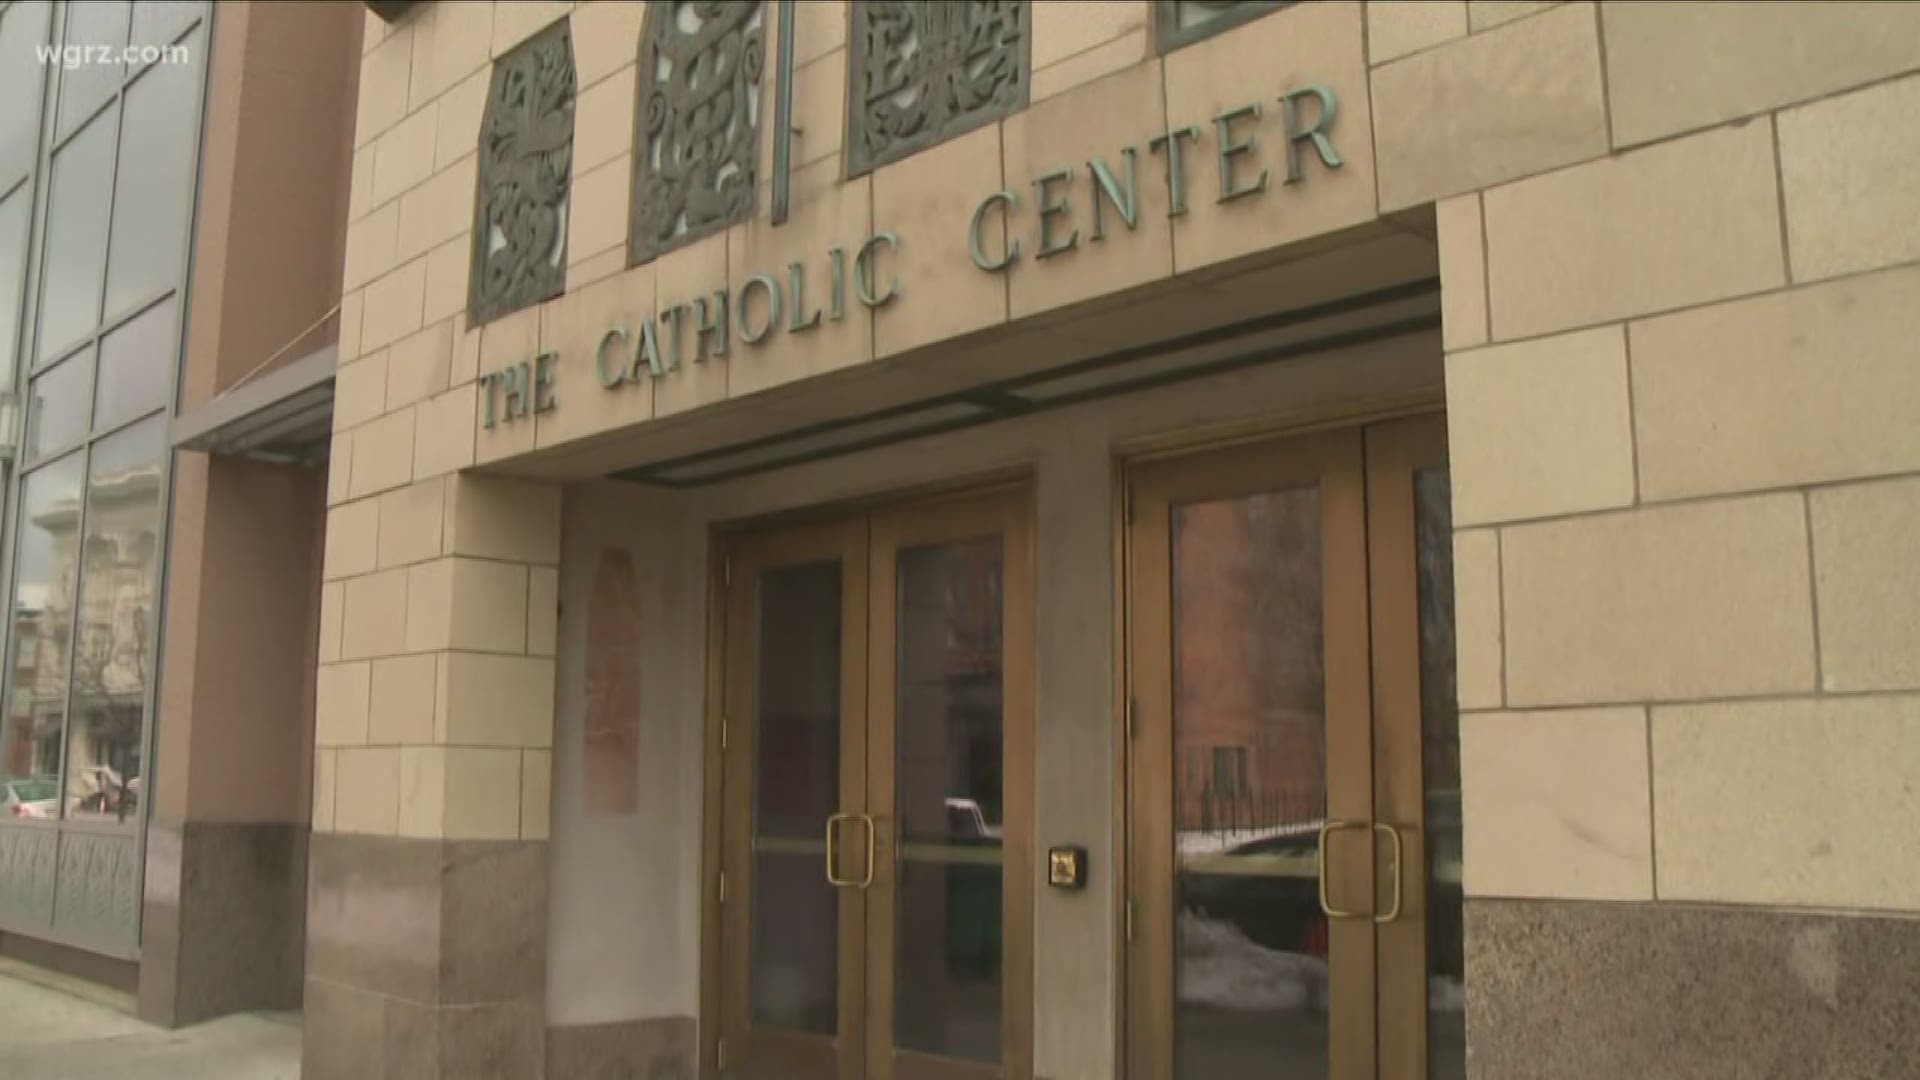 Scharfenberger believes move will come before a new permanent bishop is appointed. A bankruptcy filing would help the diocese to reorganize its finances.